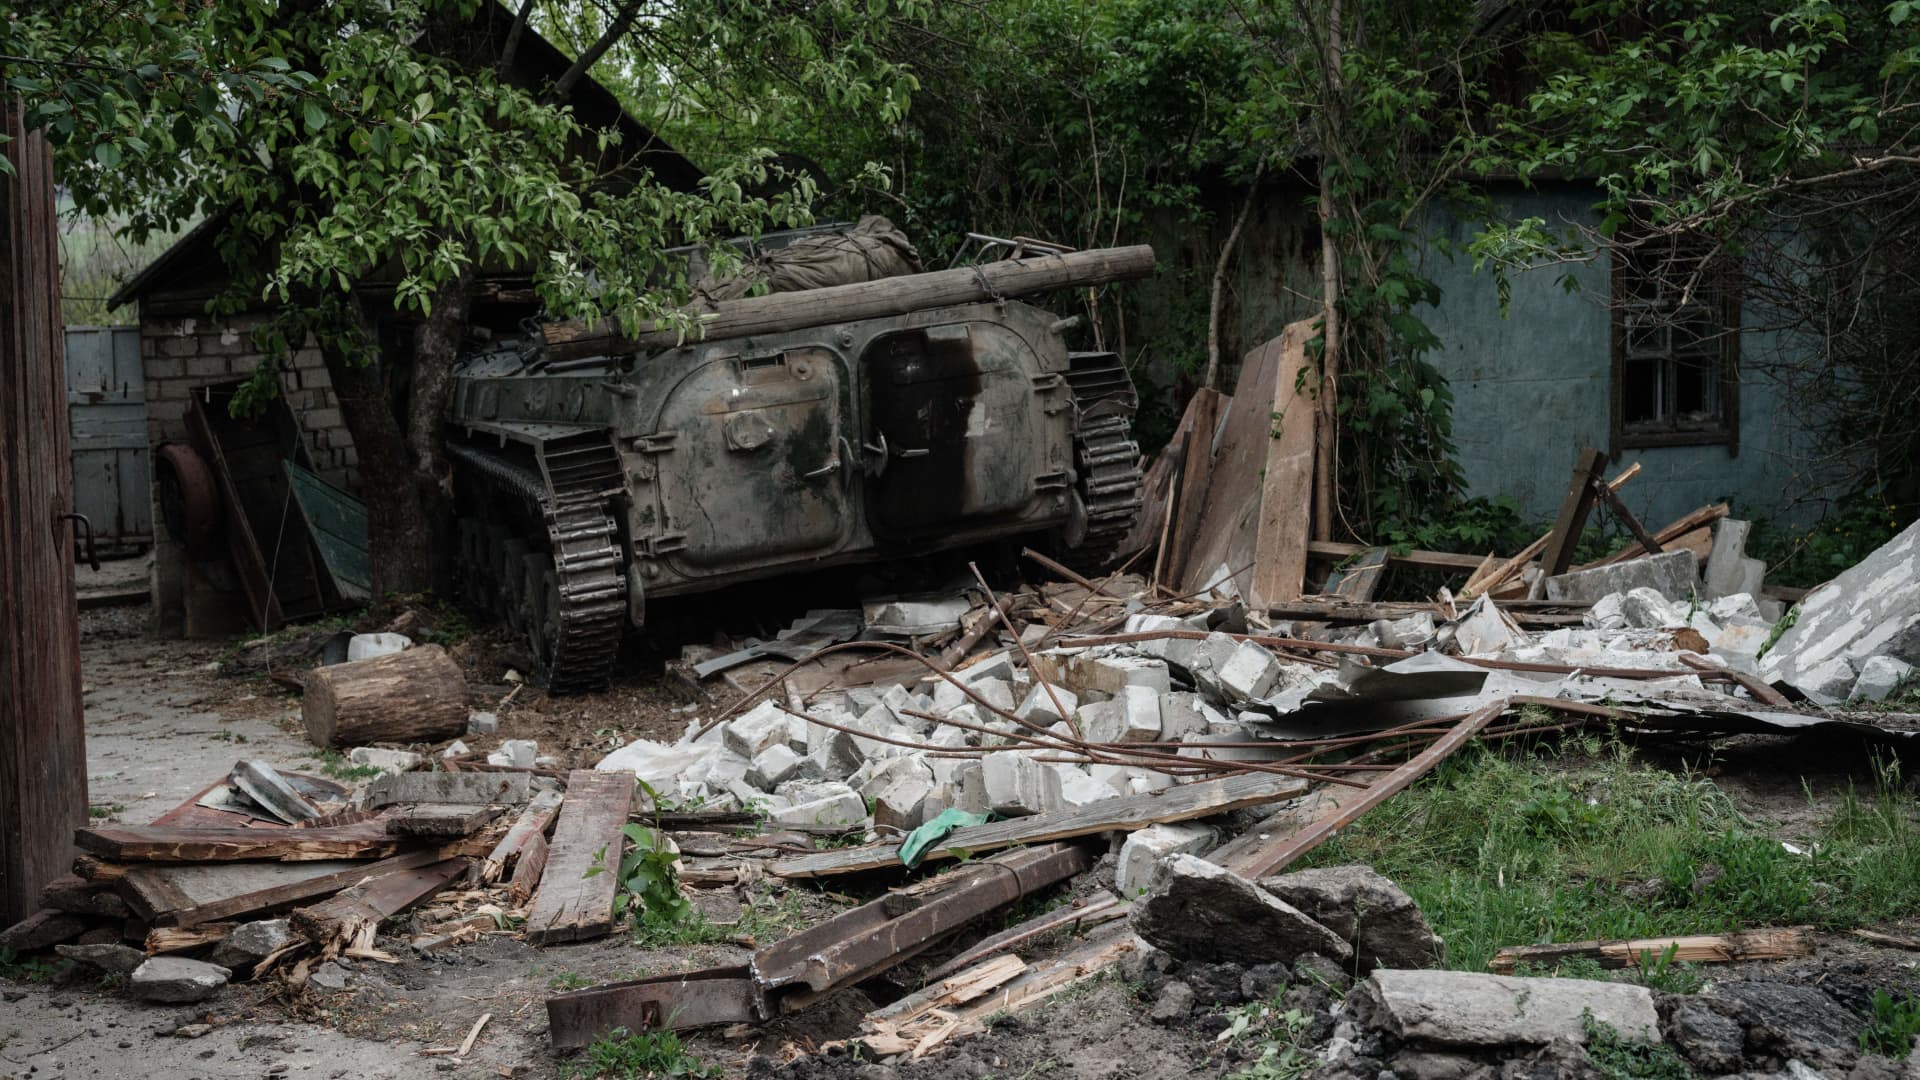 The remains of a military vehicle is seen following the shelling of the village of Bilogorivka, Lugansk region, eastern Ukraine, pictured on May 13, 2022.